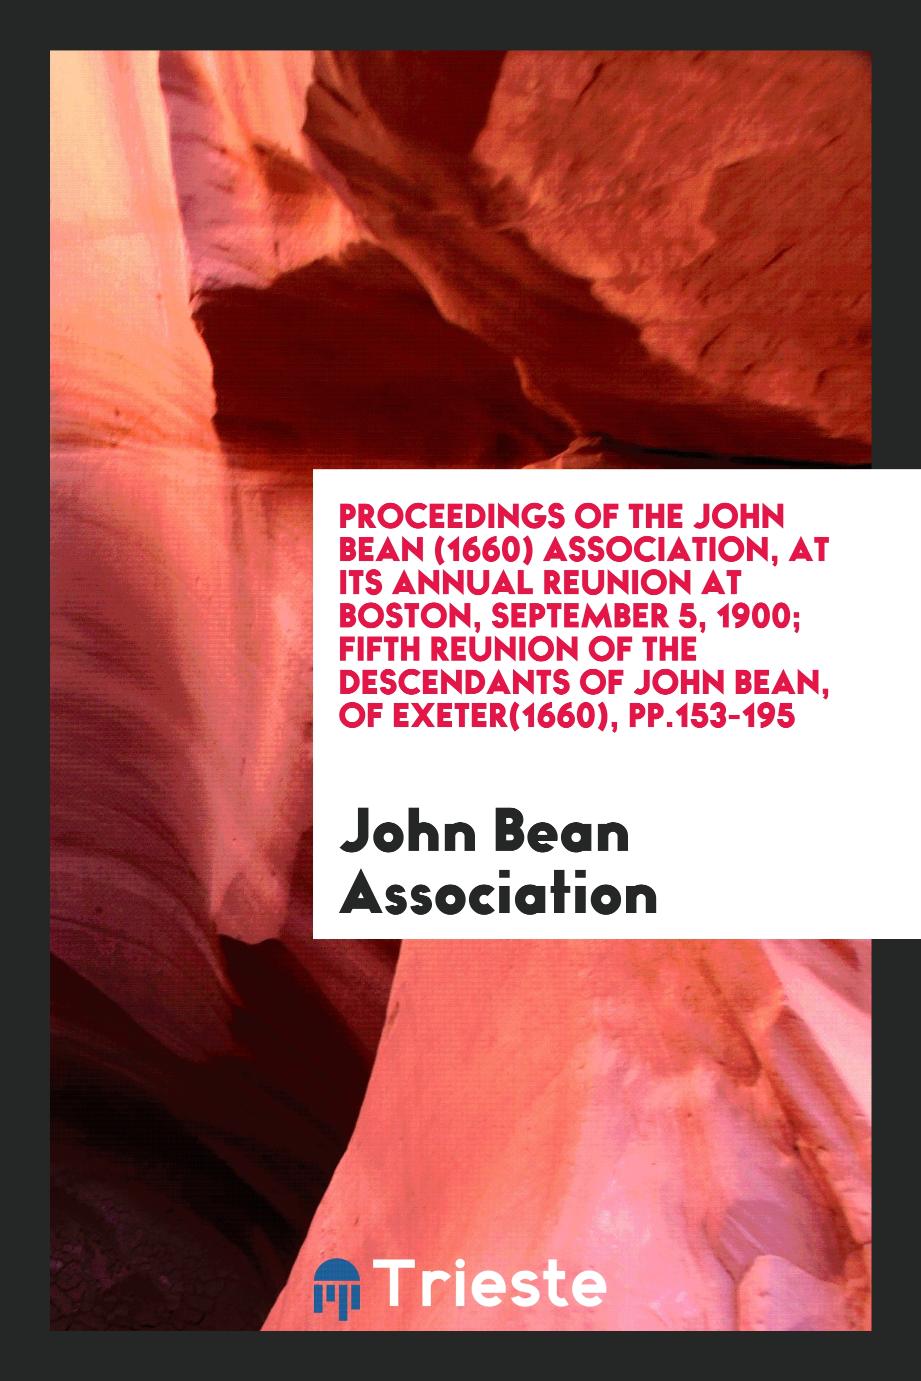 Proceedings of the John Bean (1660) Association, at its annual reunion at Boston, September 5, 1900; Fifth Reunion of the descendants of John Bean, of Exeter(1660), pp.153-195